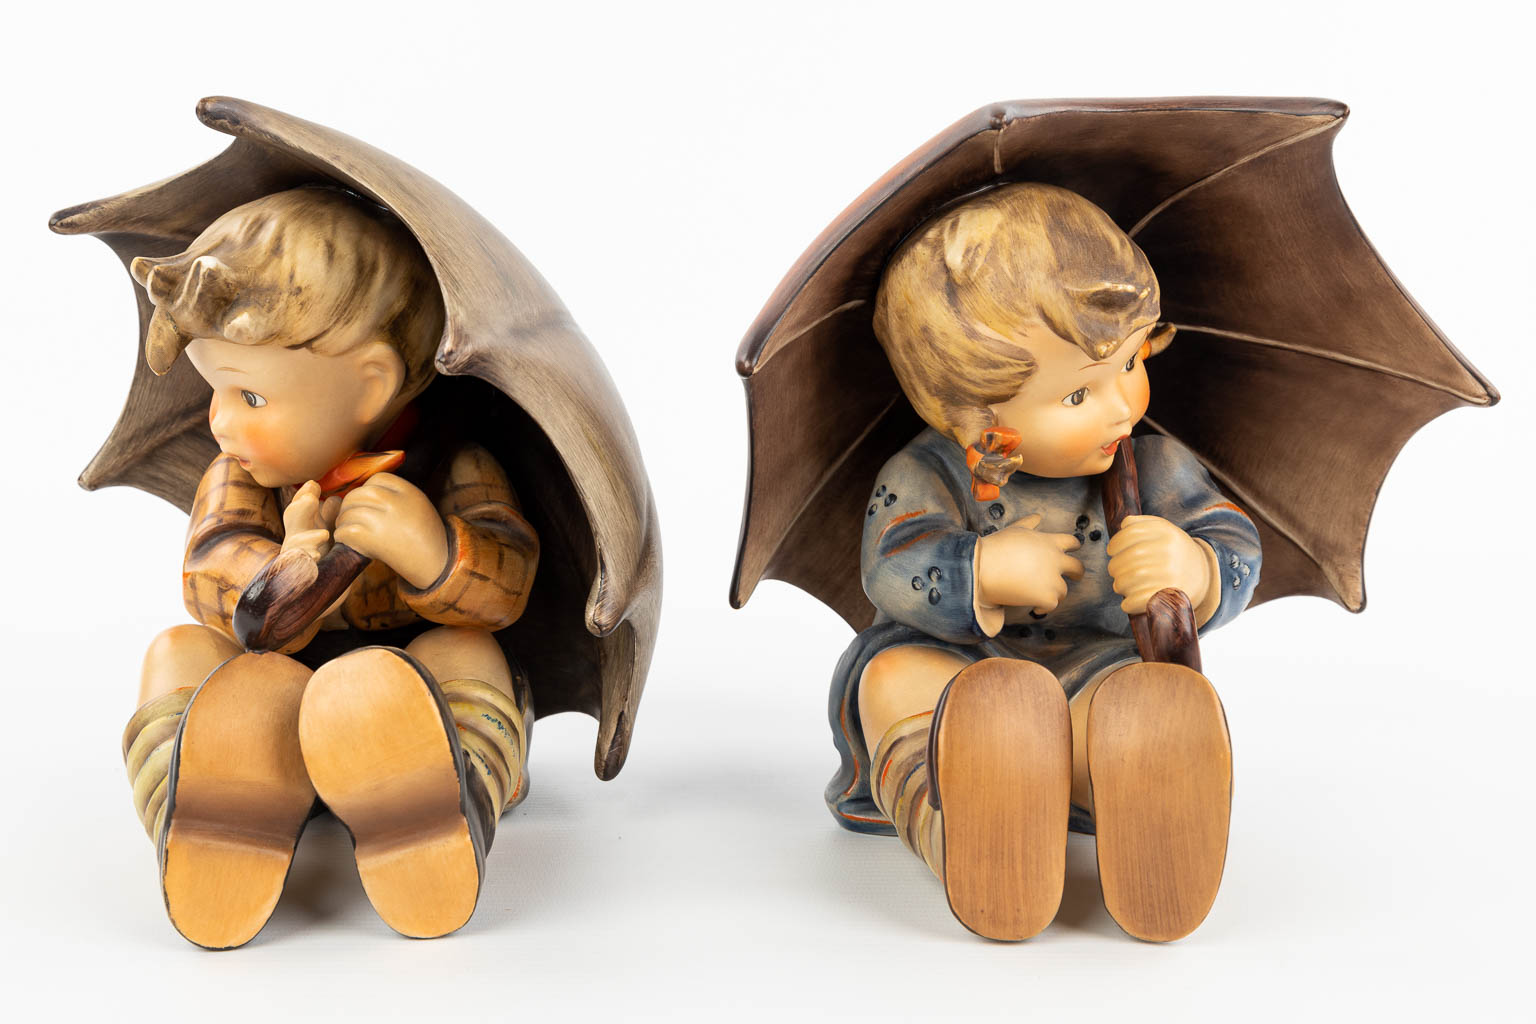 A collection of 2 statues of children with an umbrella made by Hummel. (H:19cm)